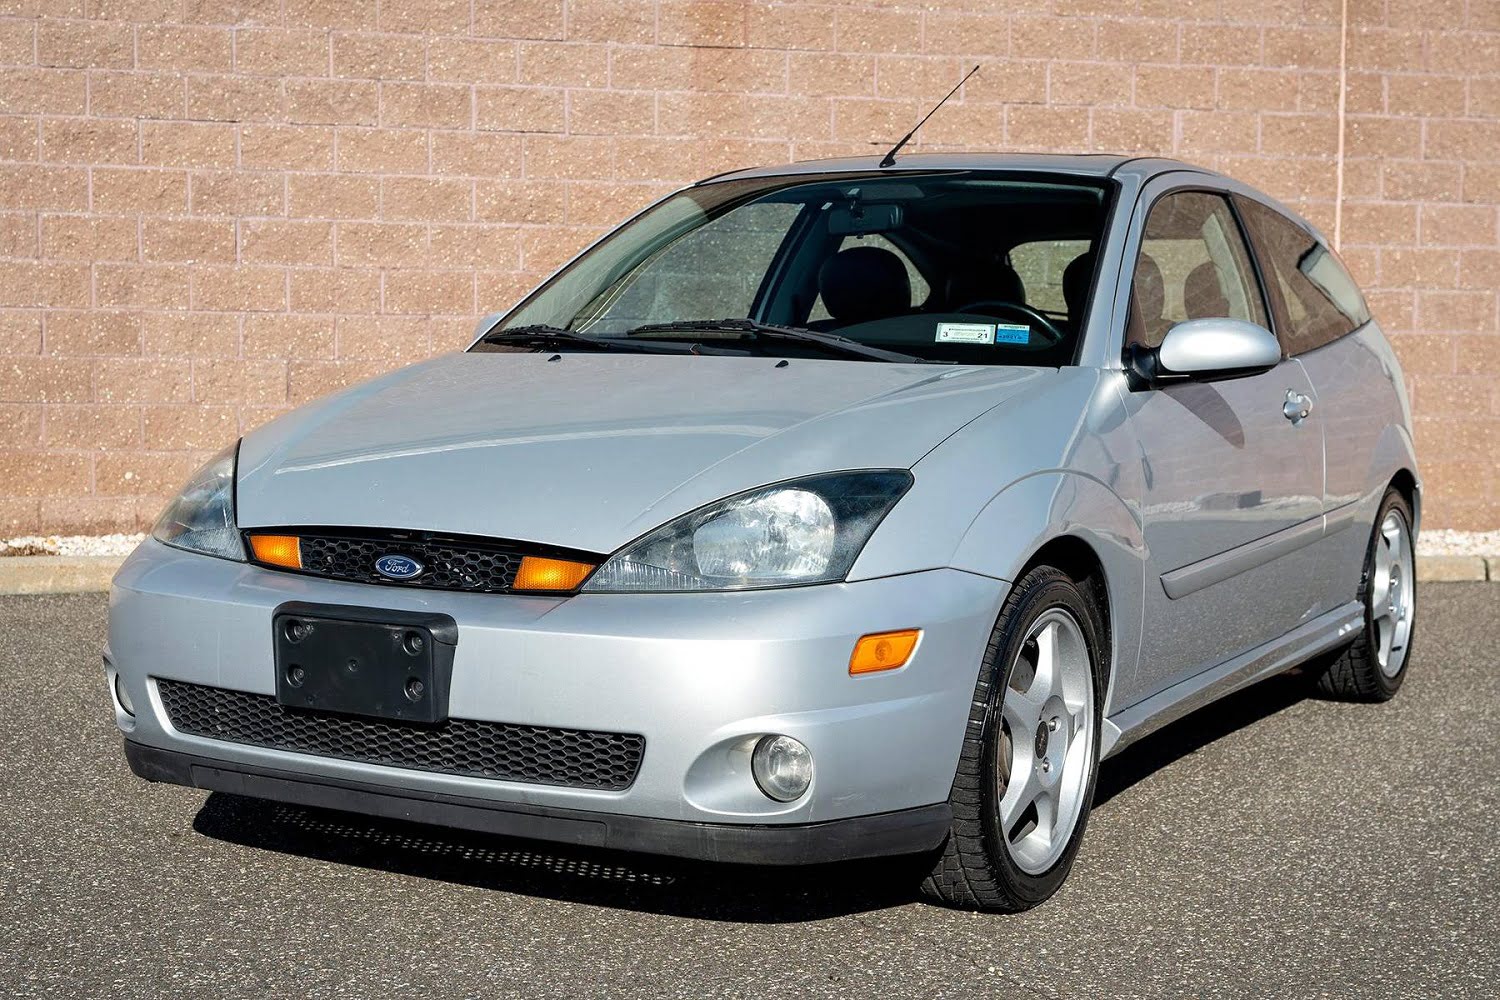 This 2002 Ford Focus SVT Is An Improbable Bone-Stock Survivor